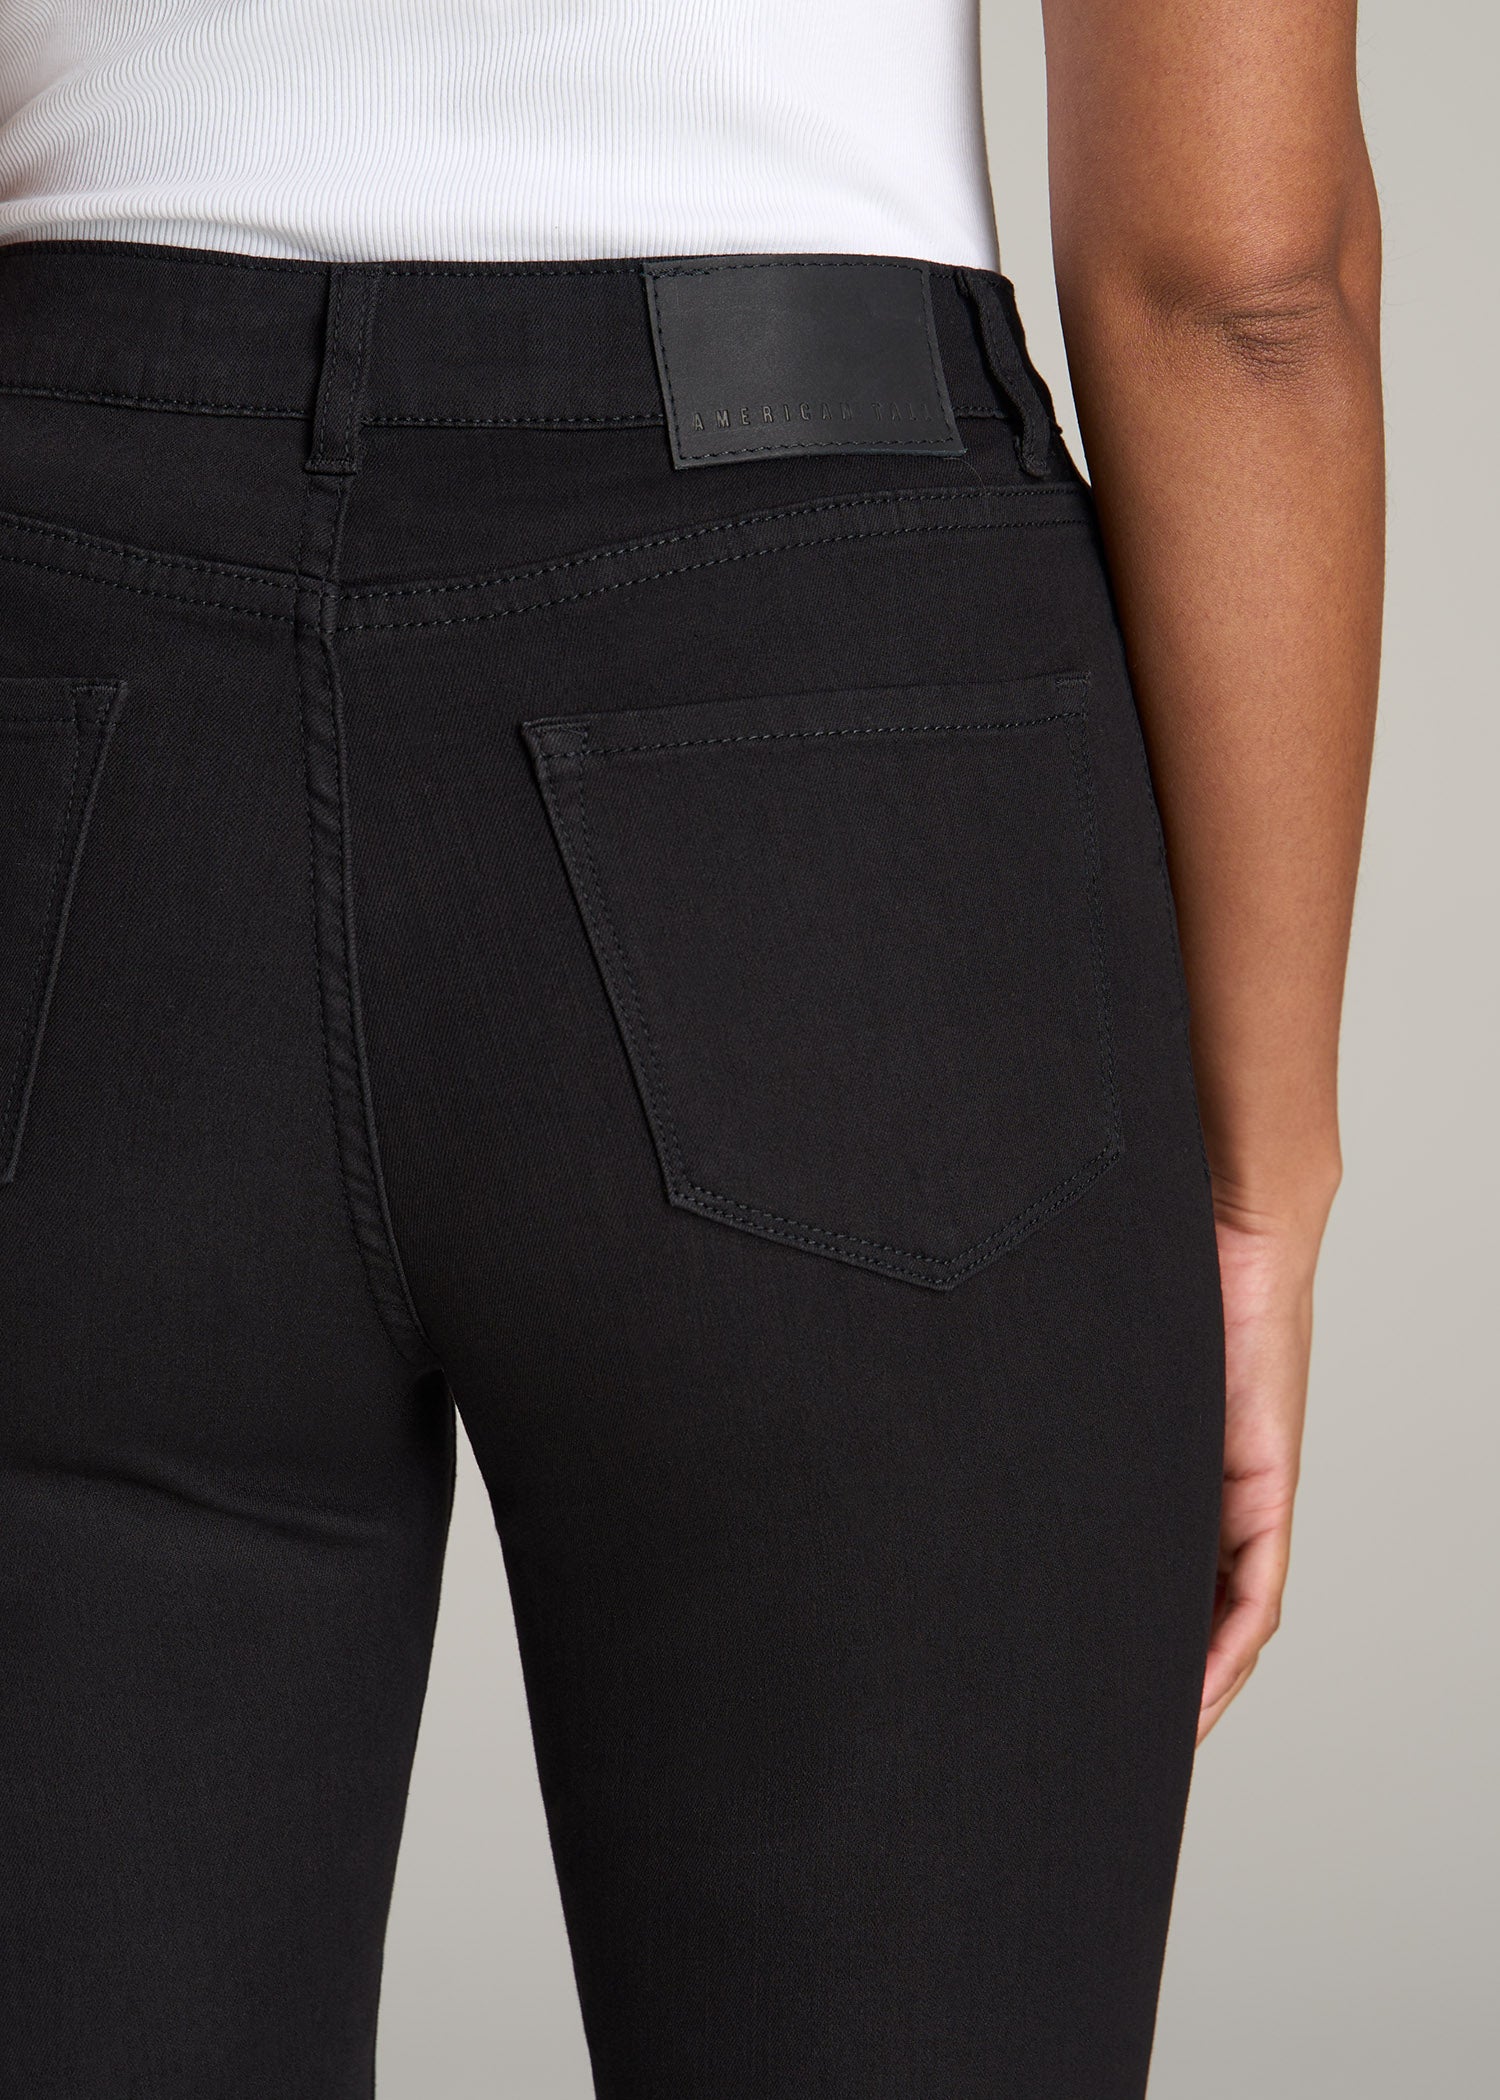 Women's Black High Waisted Trousers | Next Official Site